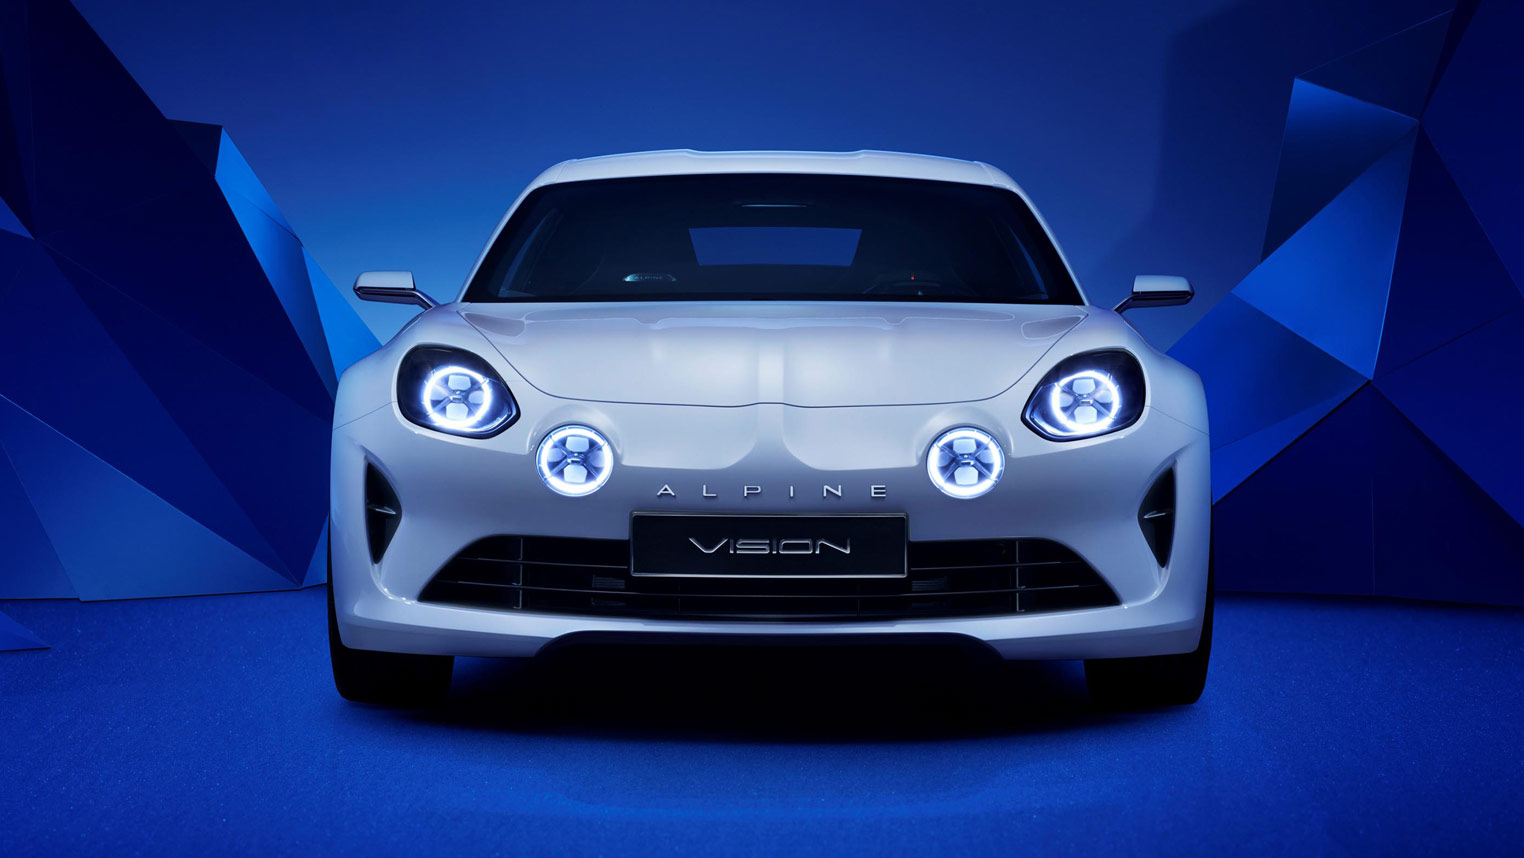 Alpine Vision Concept car in white, front view